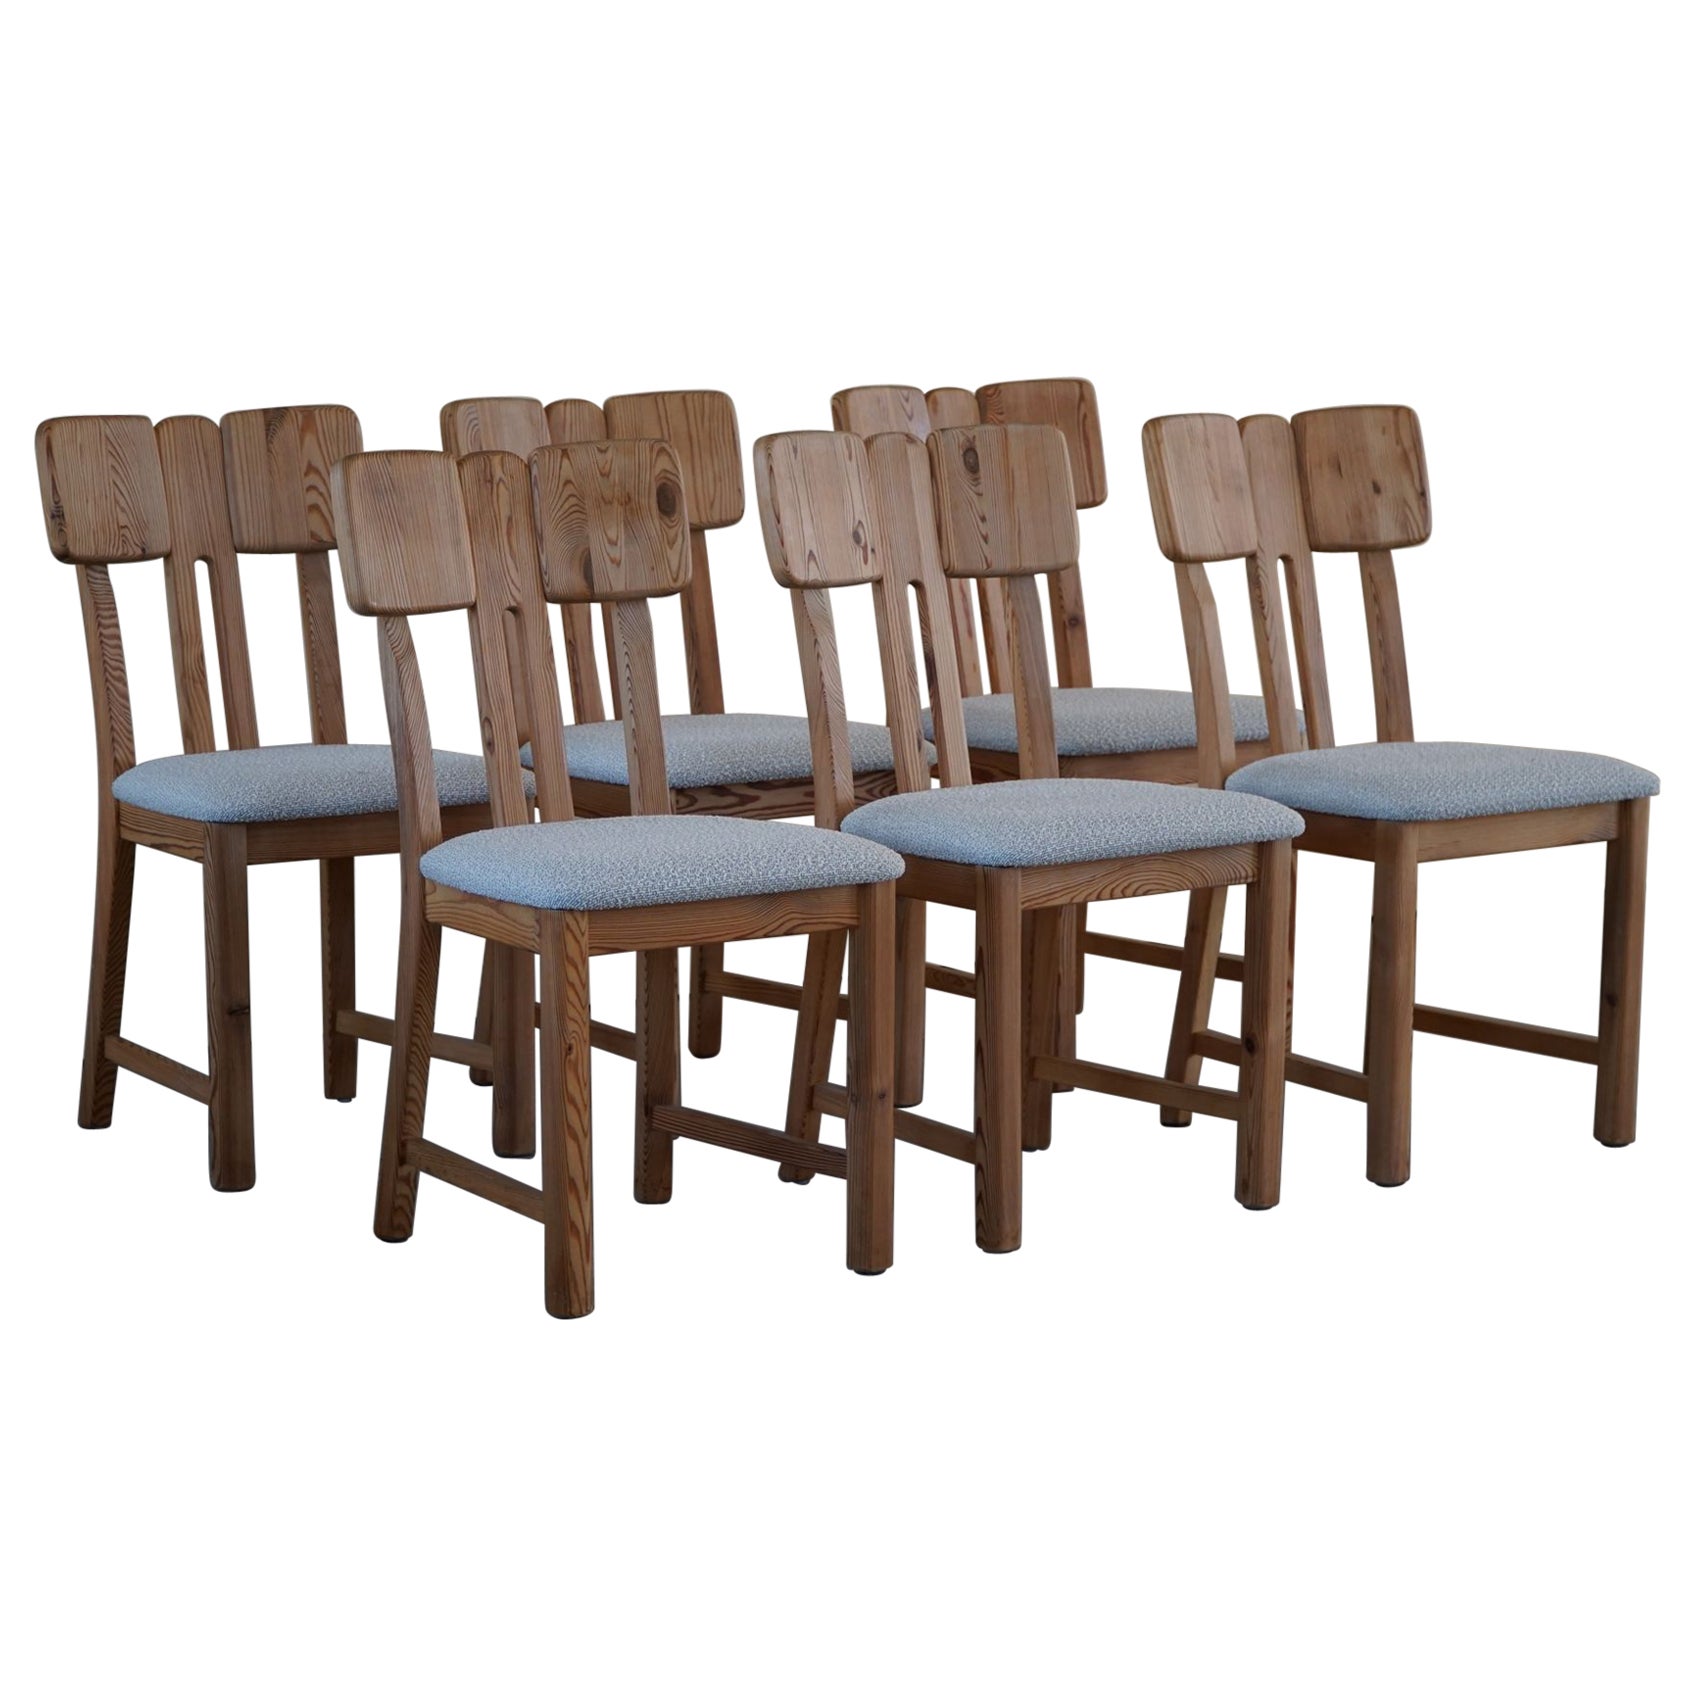 Danish Mid Century Set of 6 Sculptural Dining Chairs in Douglas Pine, 1970s